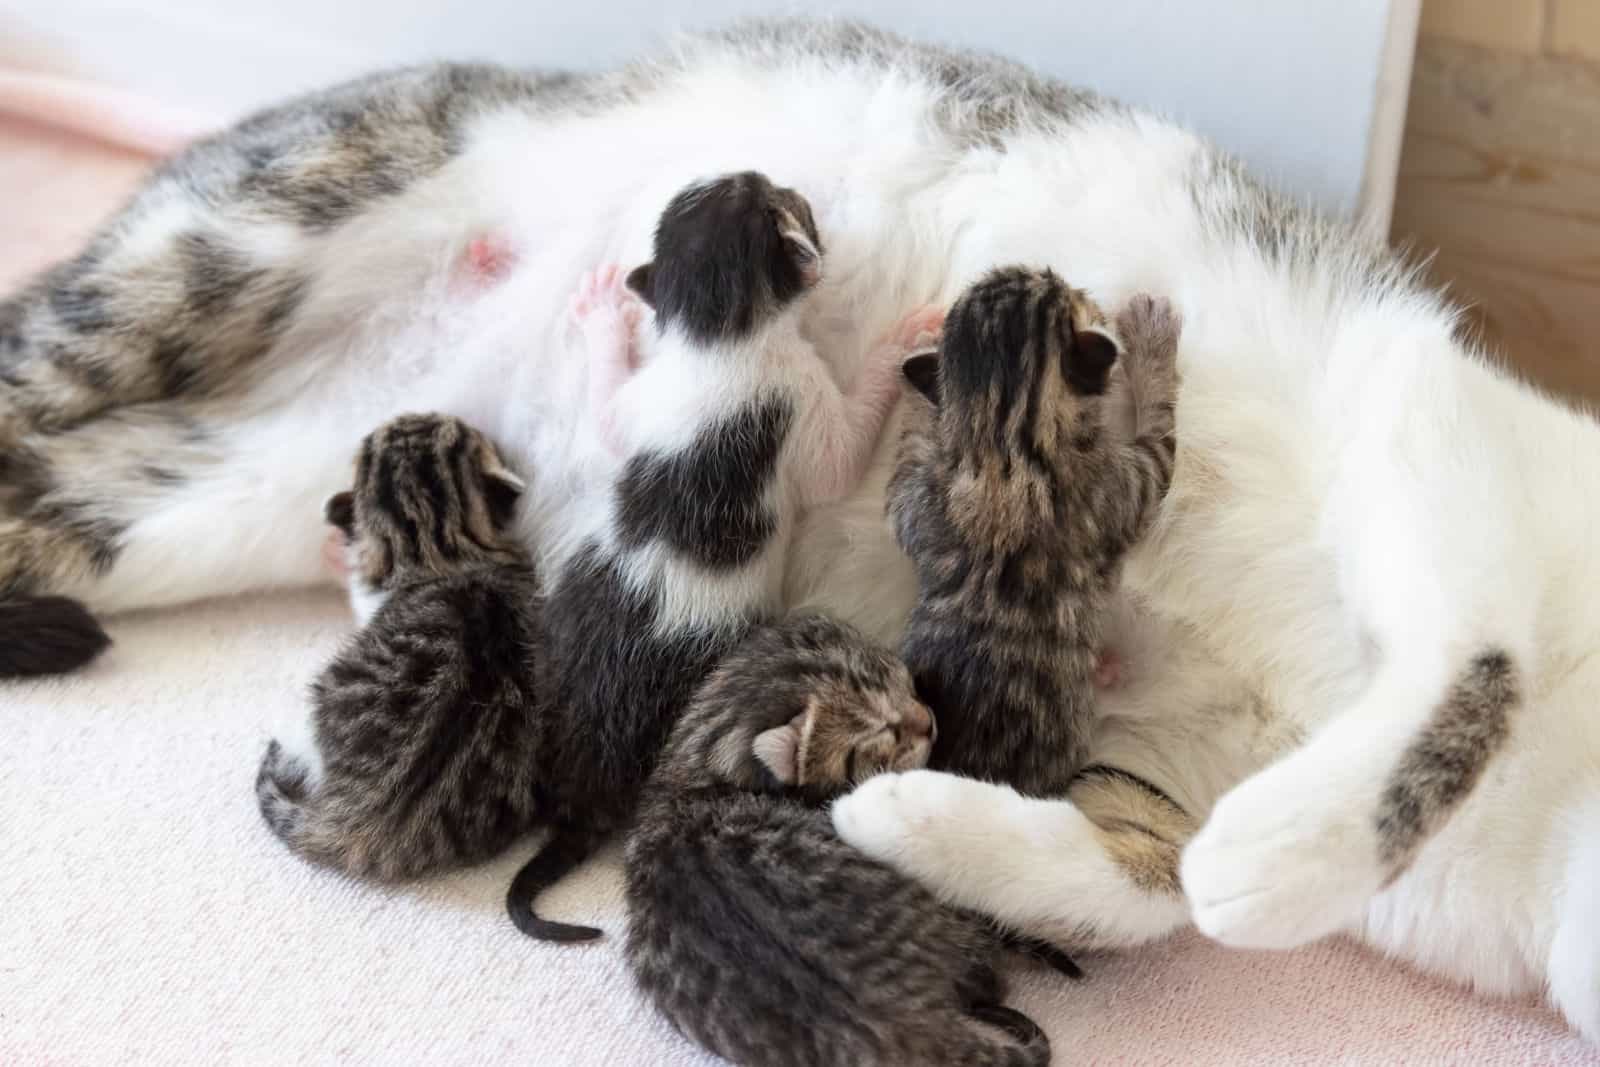 Newborn kittens nursing. Mother is a street cat who took shelter in an open house to give birth.